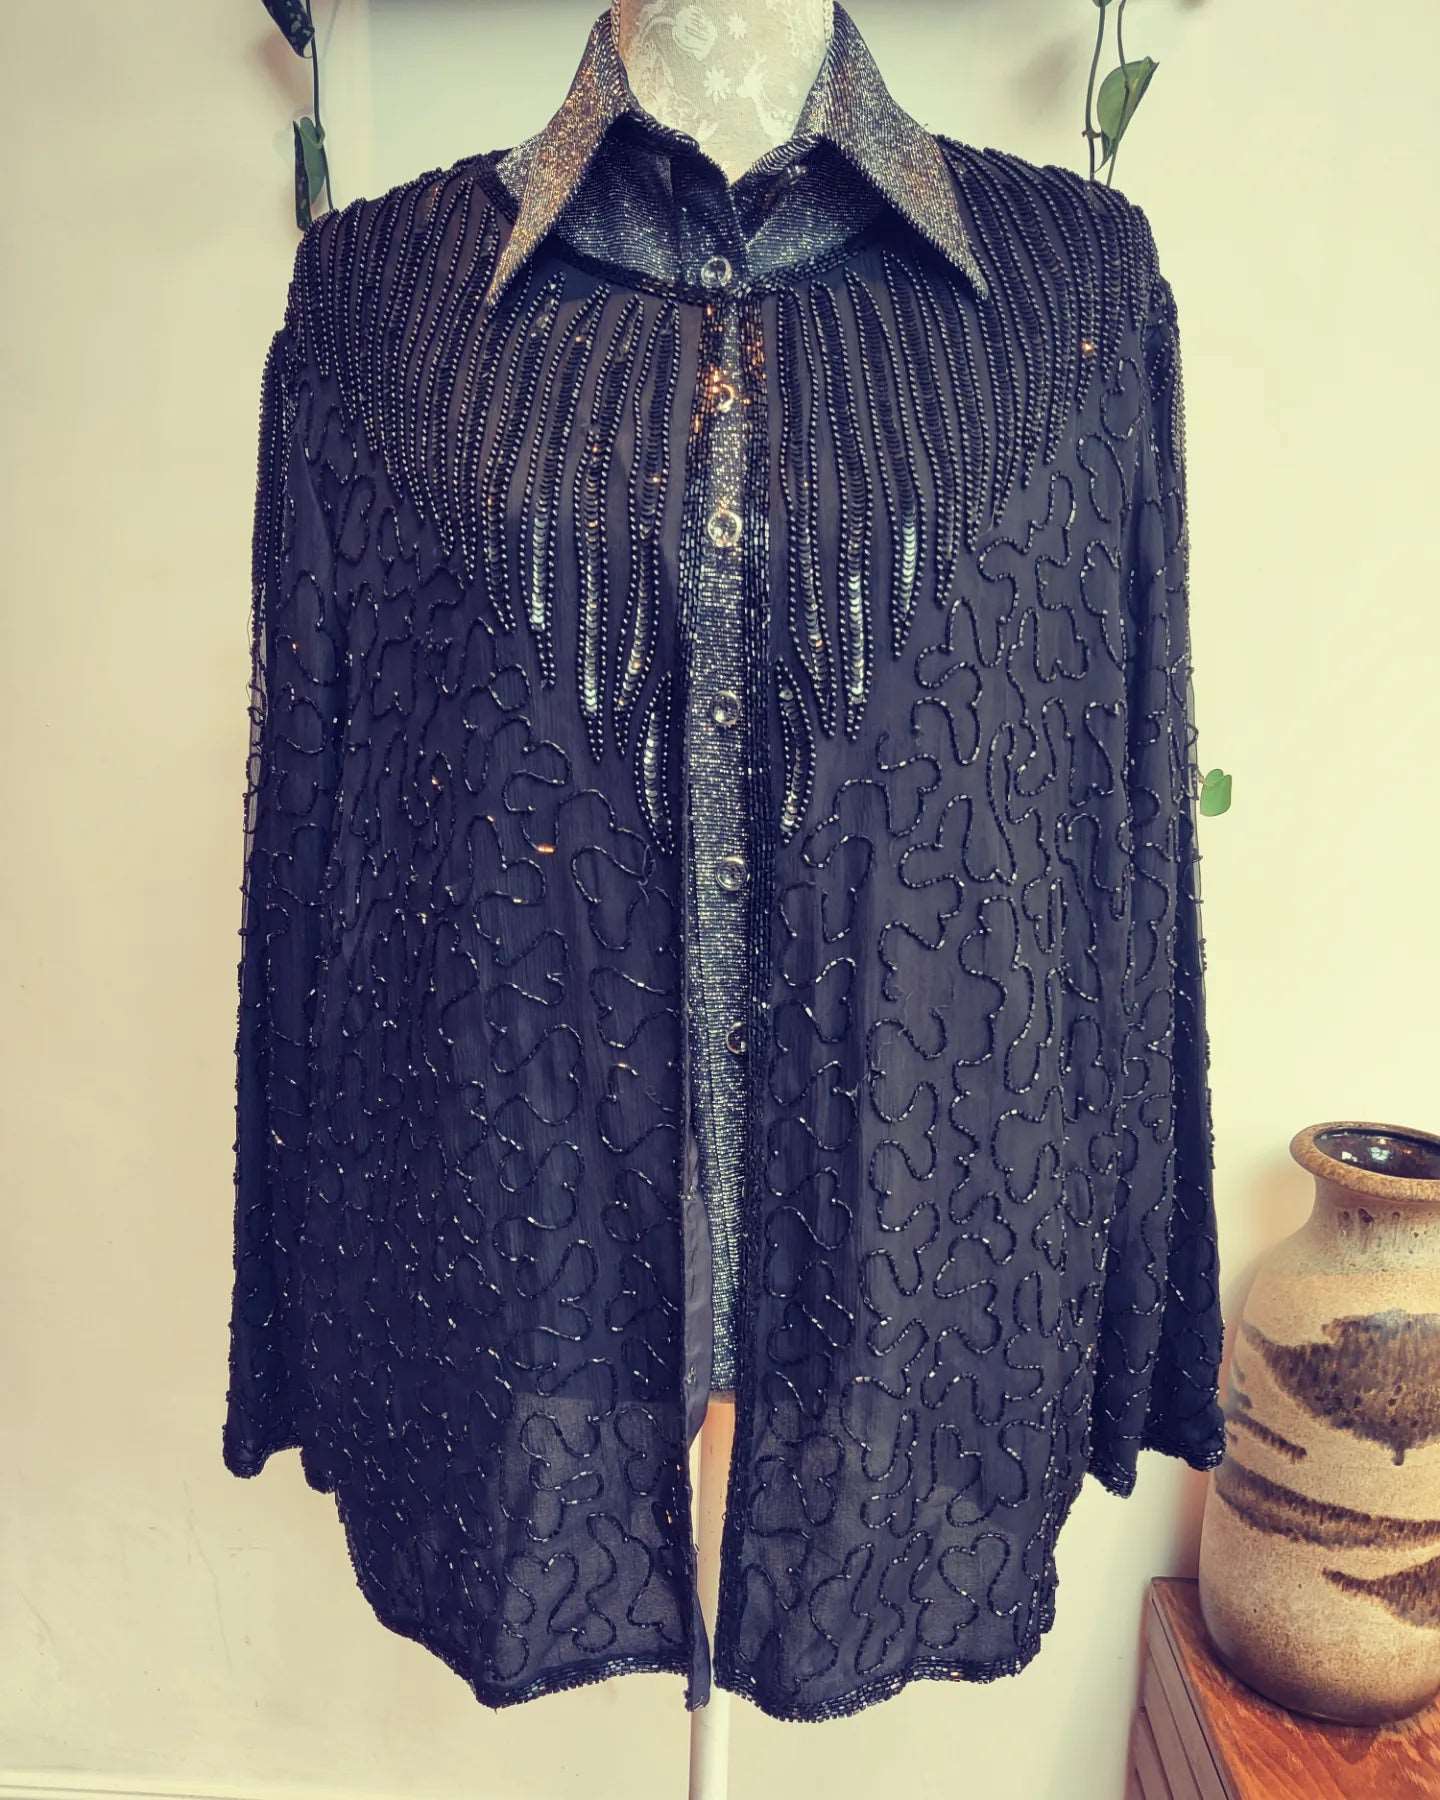 Beautiful black beaded jacket in a size 14-18. Original 1980s vintage fashion.